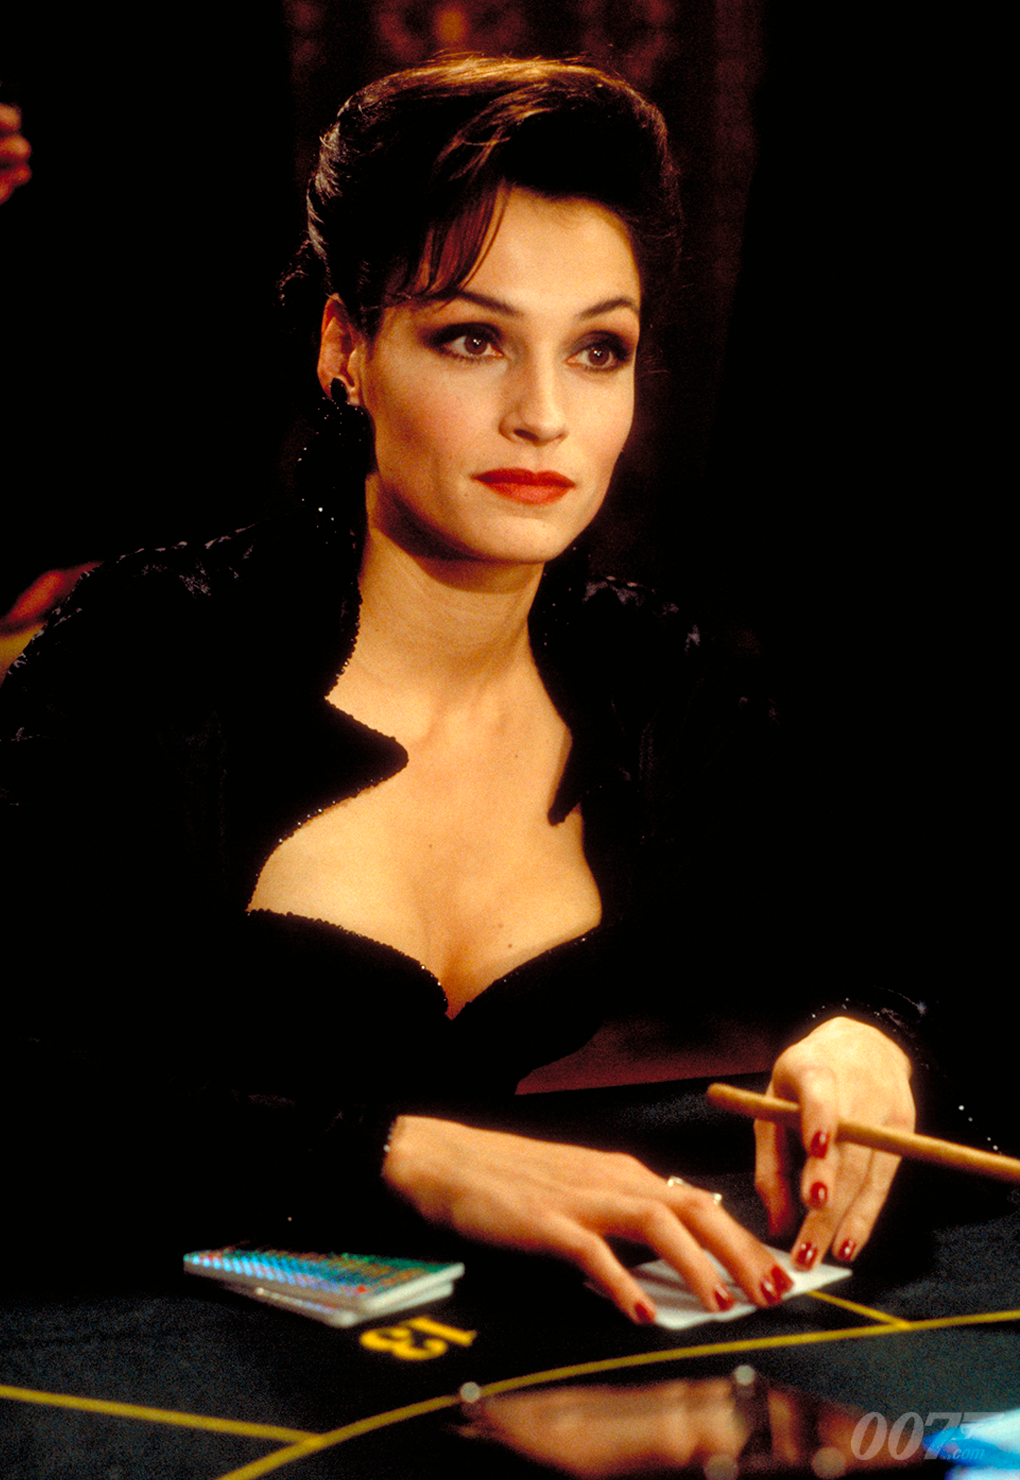 The Official James Bond 007 Website Focus Of The Week Xenia Onatopp